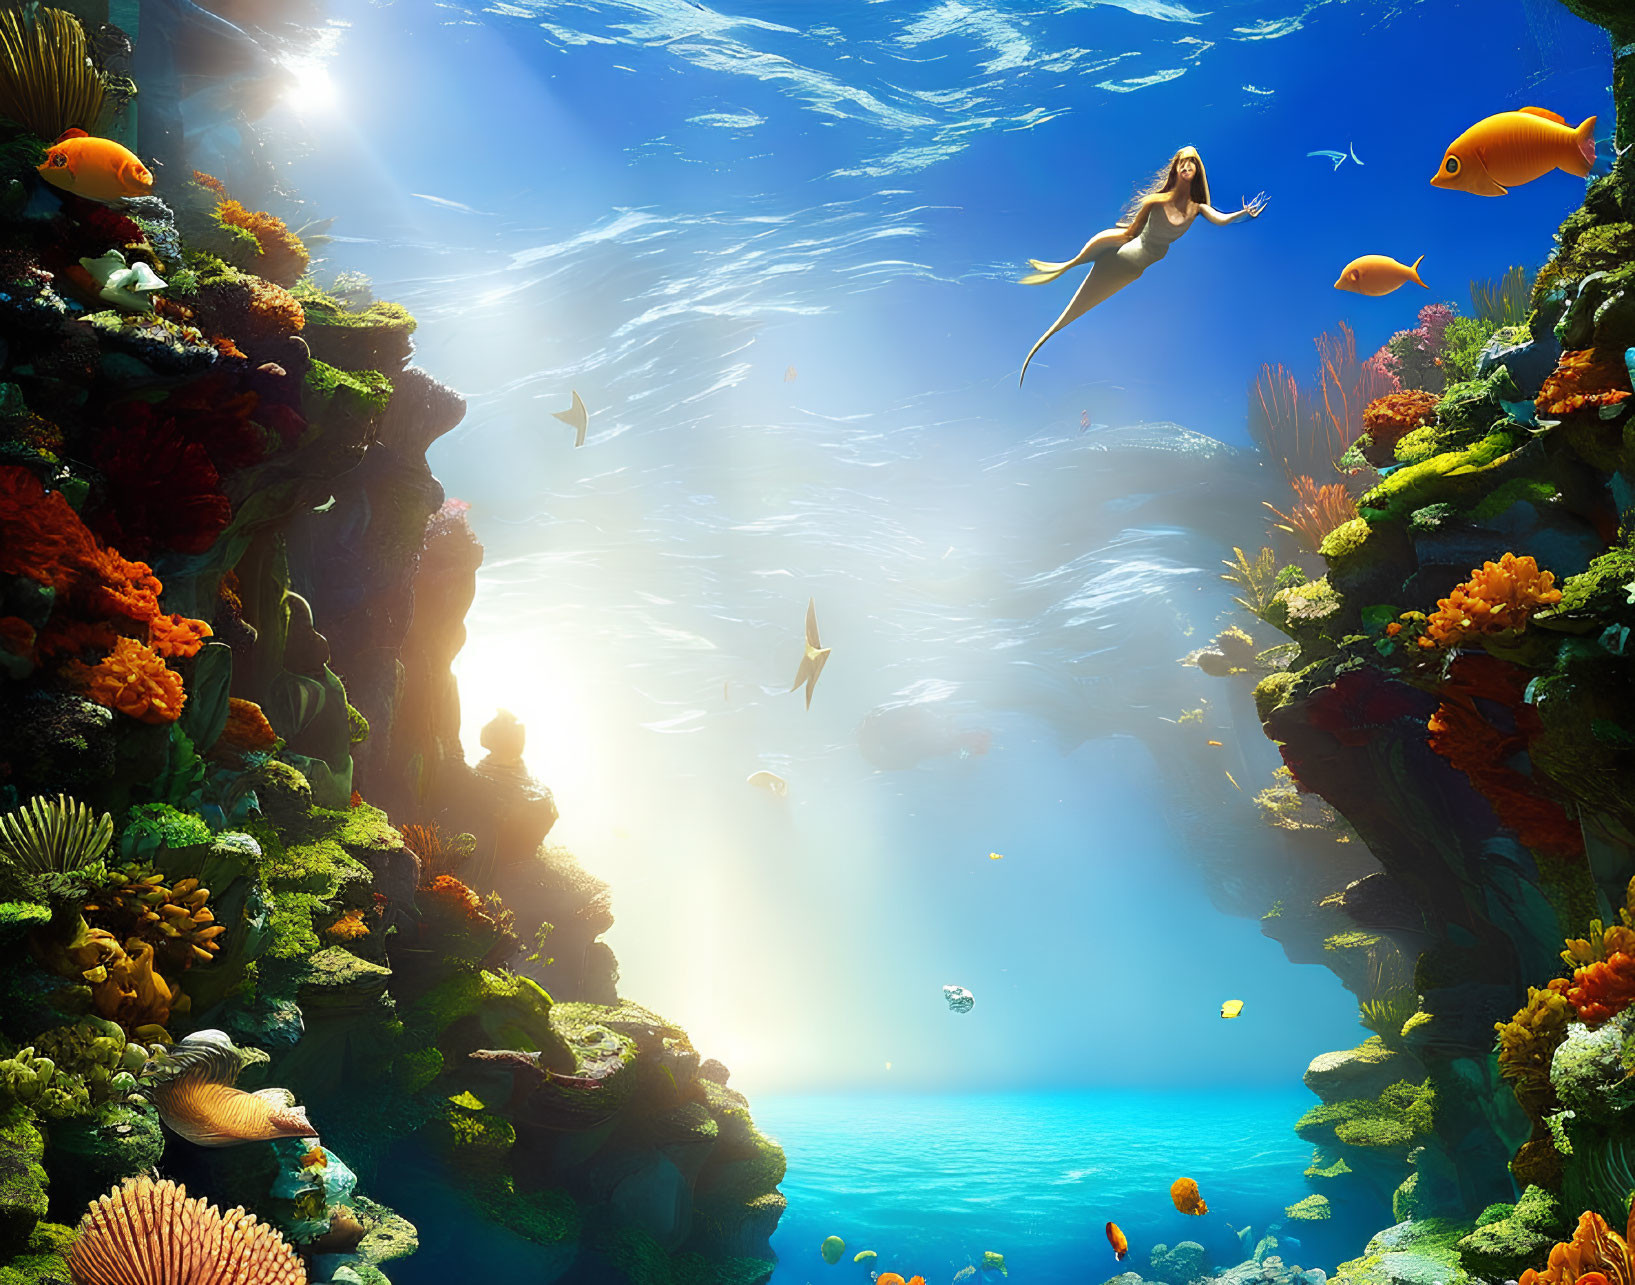 Colorful Coral Reefs and Tropical Fish in Underwater Scene